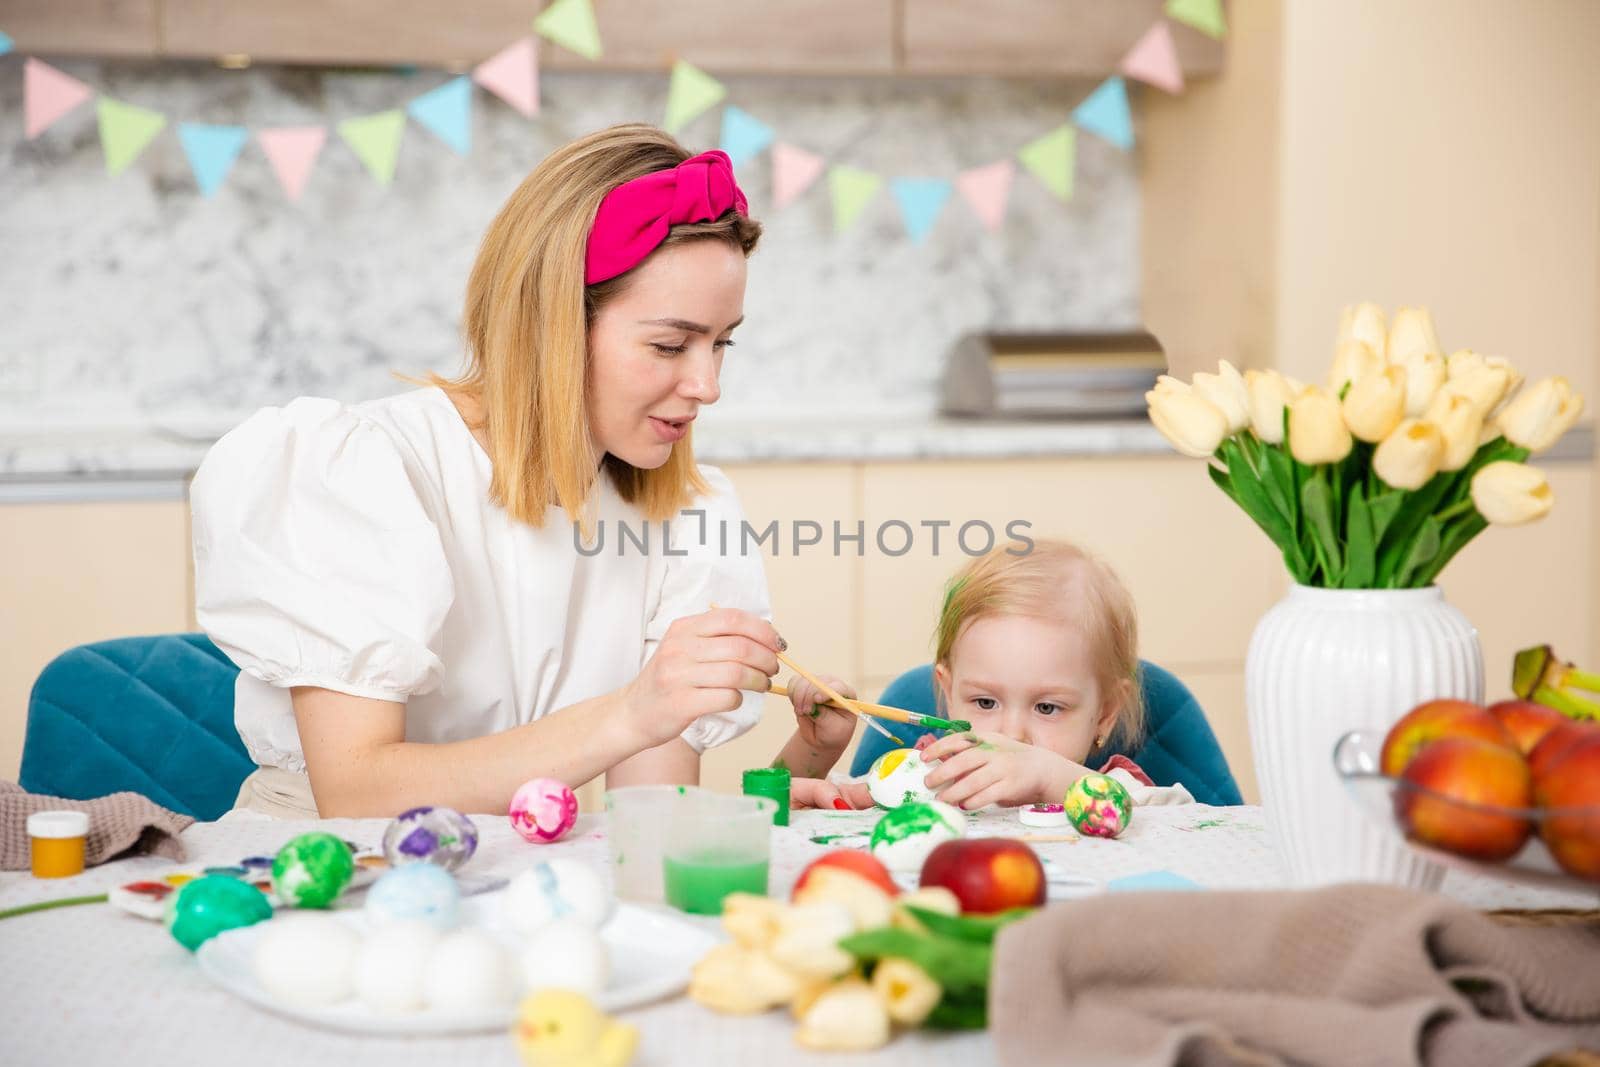 Big Happy Family preparing for Easter. Cute girl with mother painting eggs. Home activity. Concept of unity and love. Mom and daughter